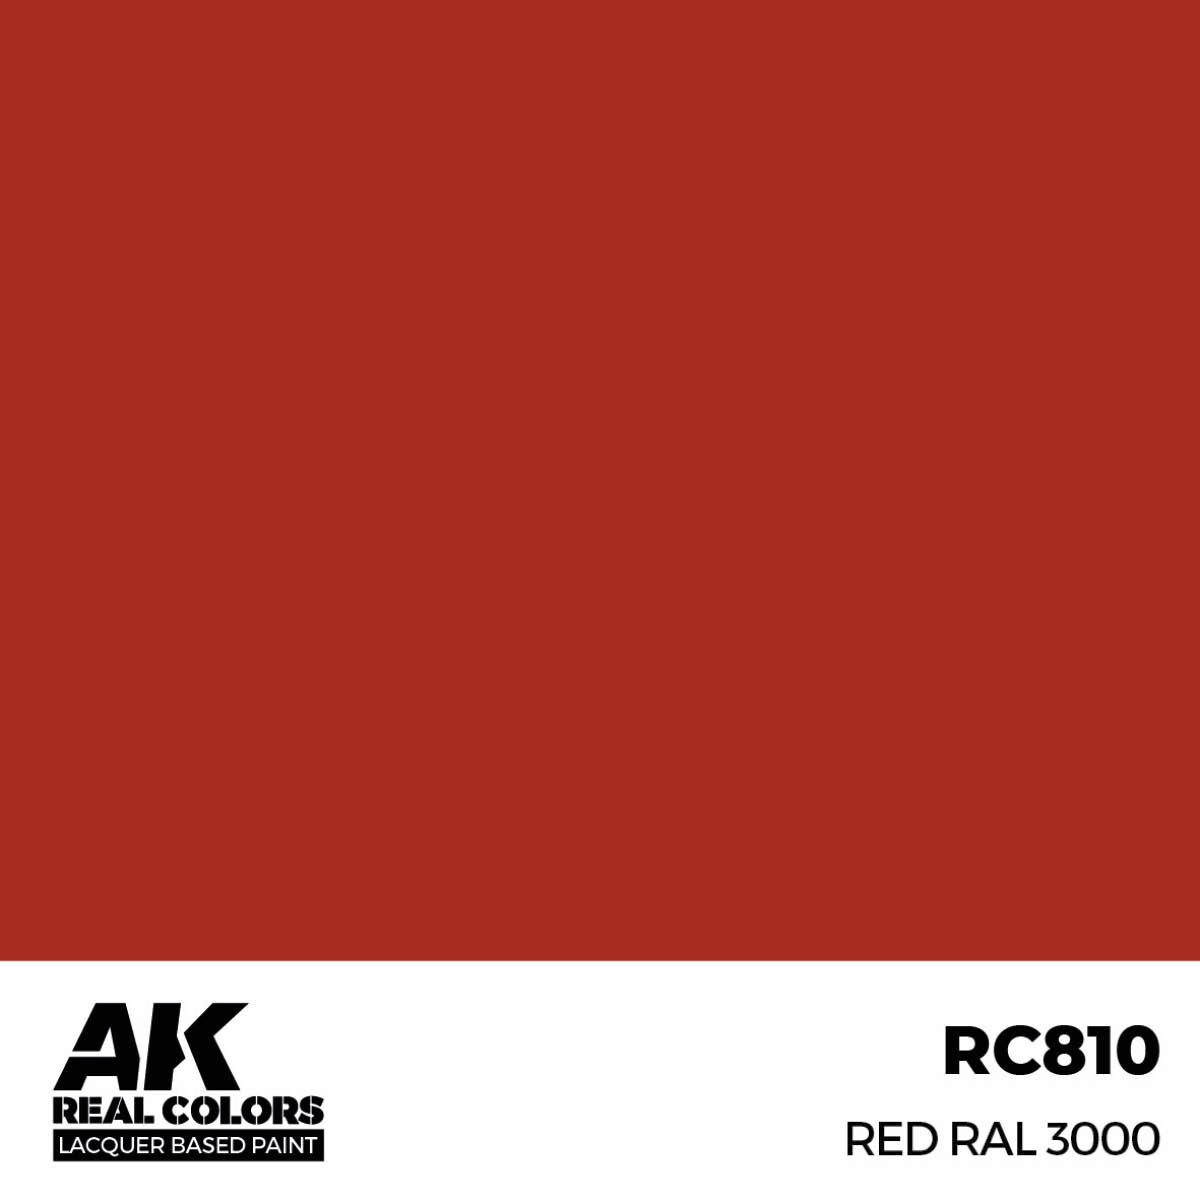 AK RC810 Real Colors Red RAL 3000 17 ml.